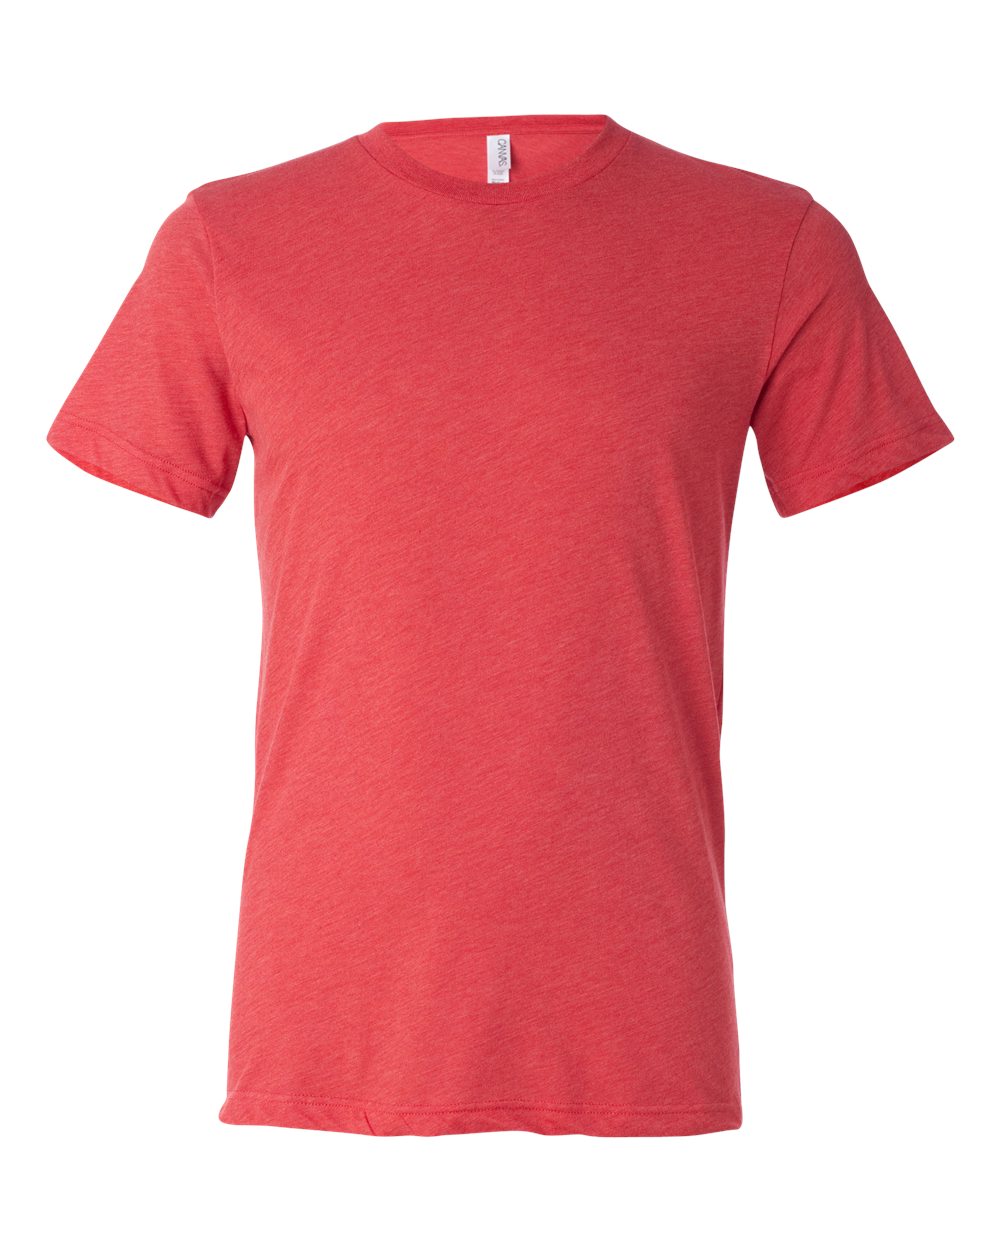 Bella + Canvas Triblend Tee (3413) in Red Triblend